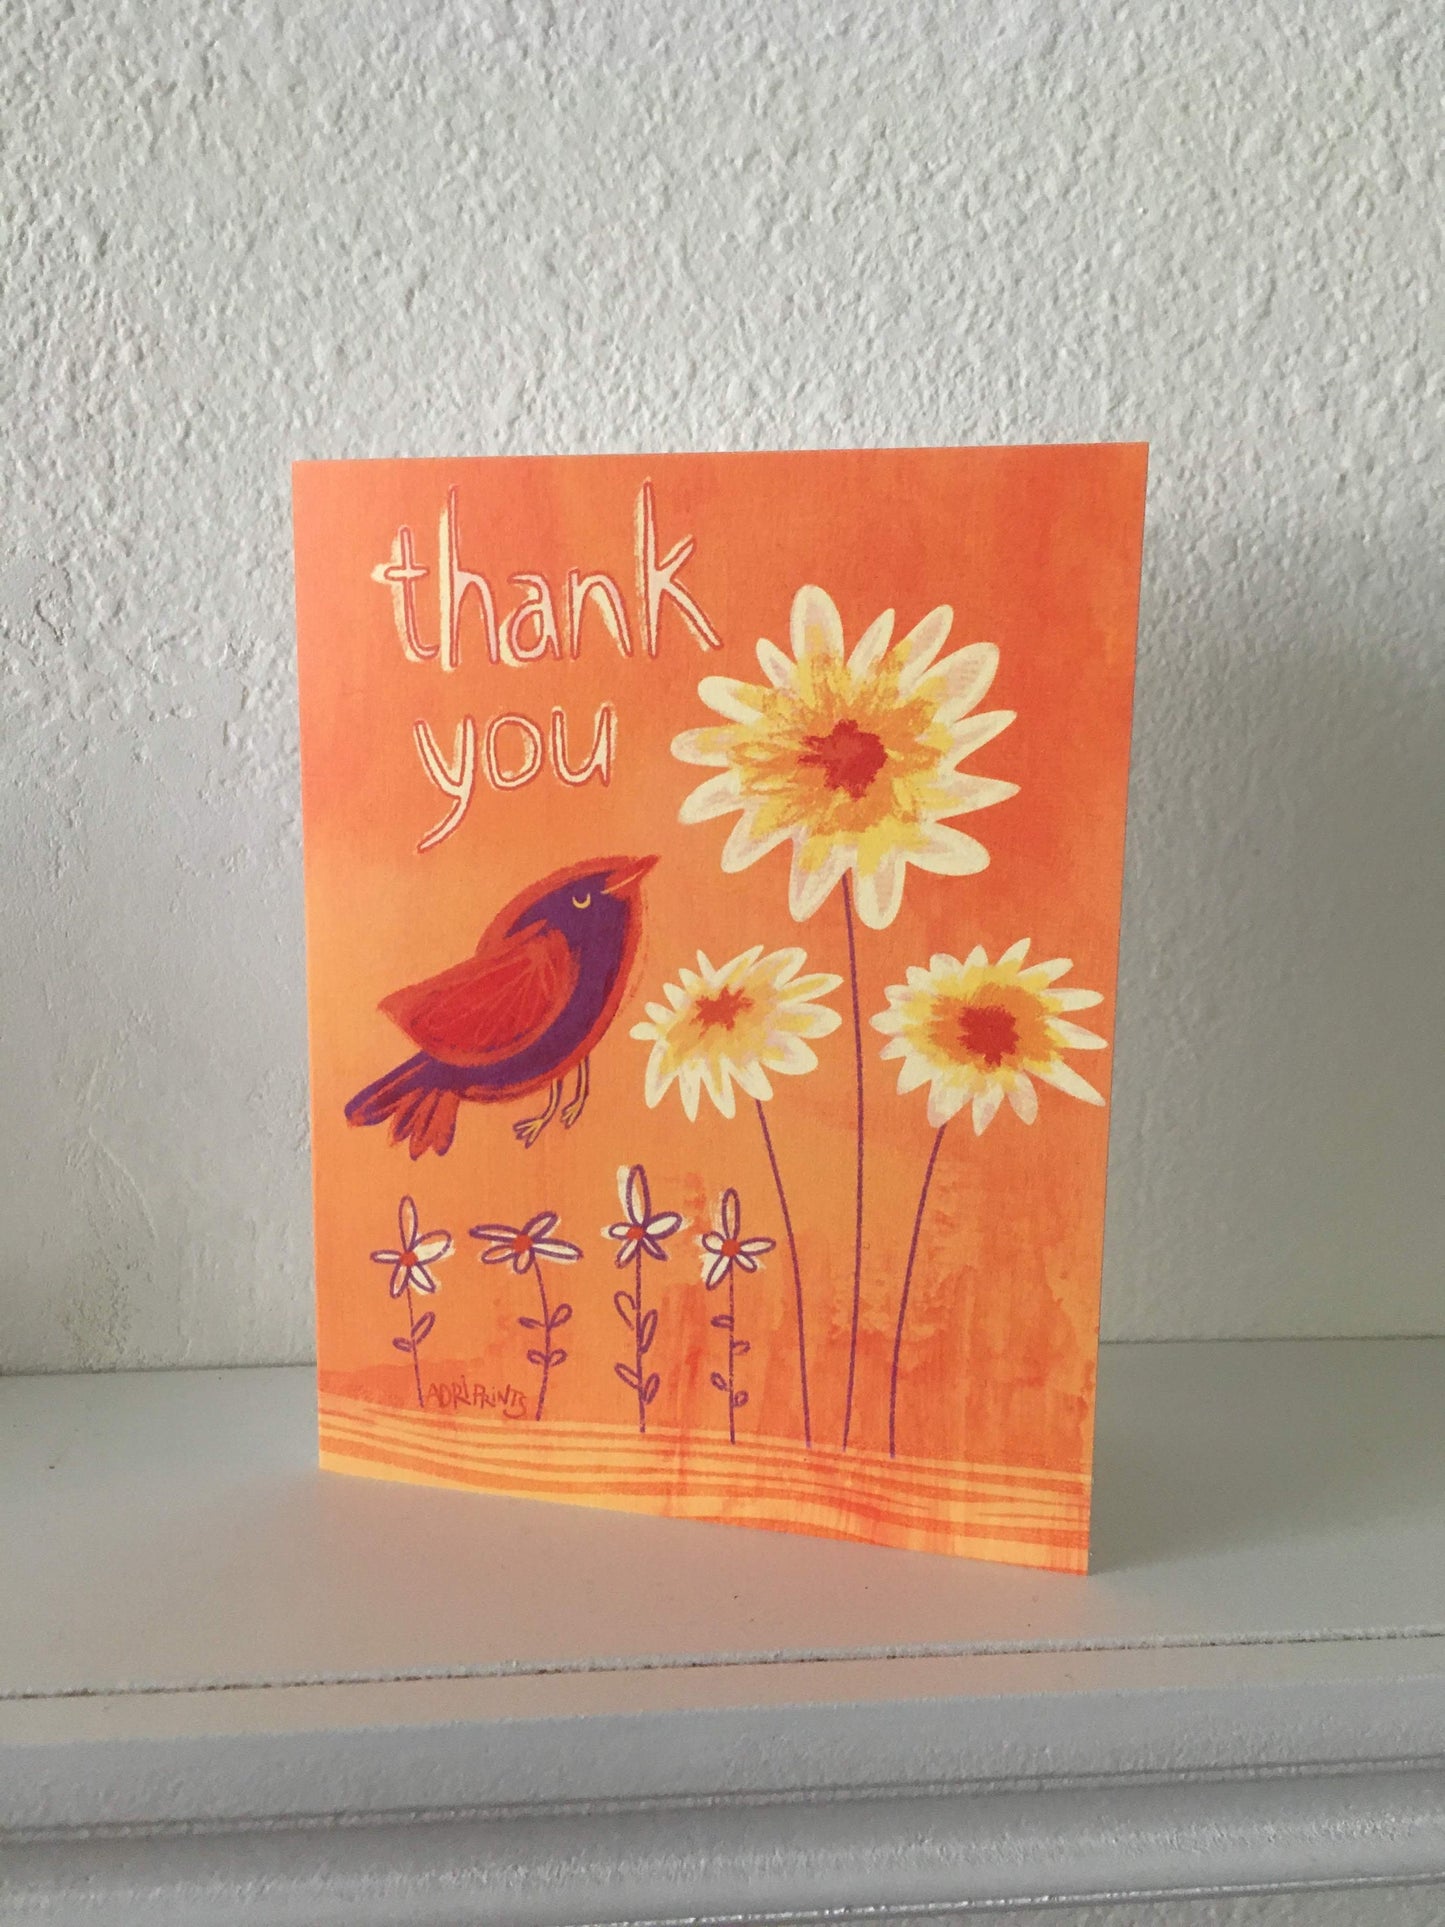 THANKS - Sunflower and Bird Thank You Card with envelope, appreciation, gratitude, stationery, art by Adriana Bergstrom (Adriprints)